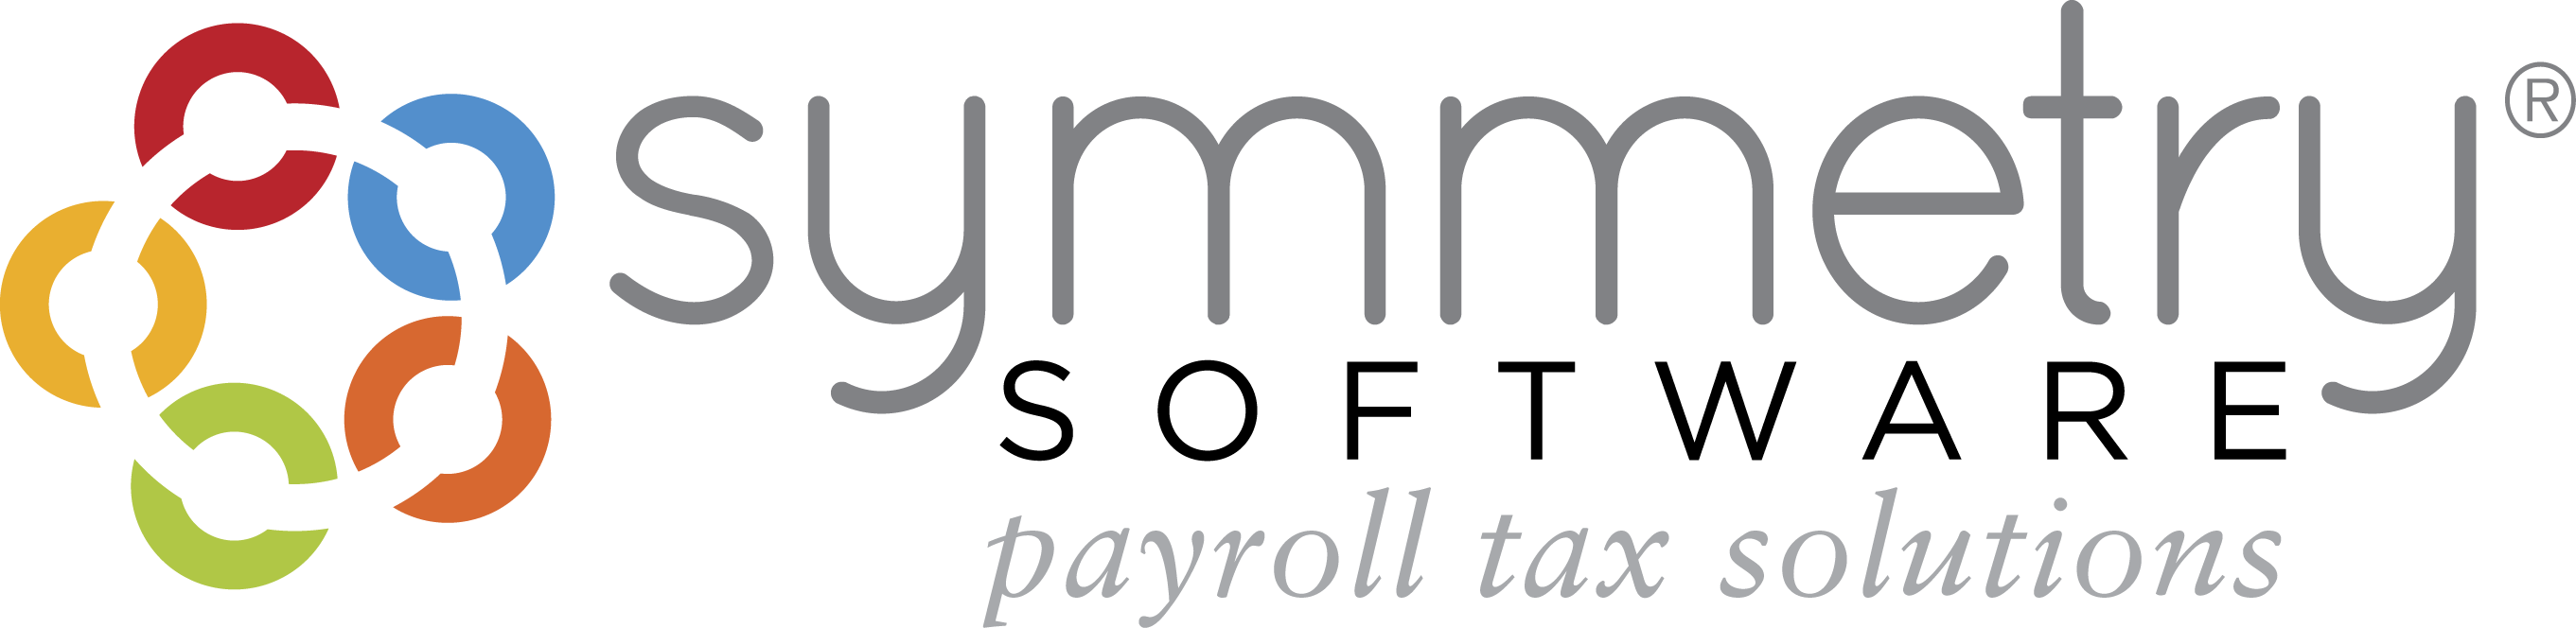 Symmetry Software, specialists in payroll withholding tax solutions for the large employers and payroll providers.